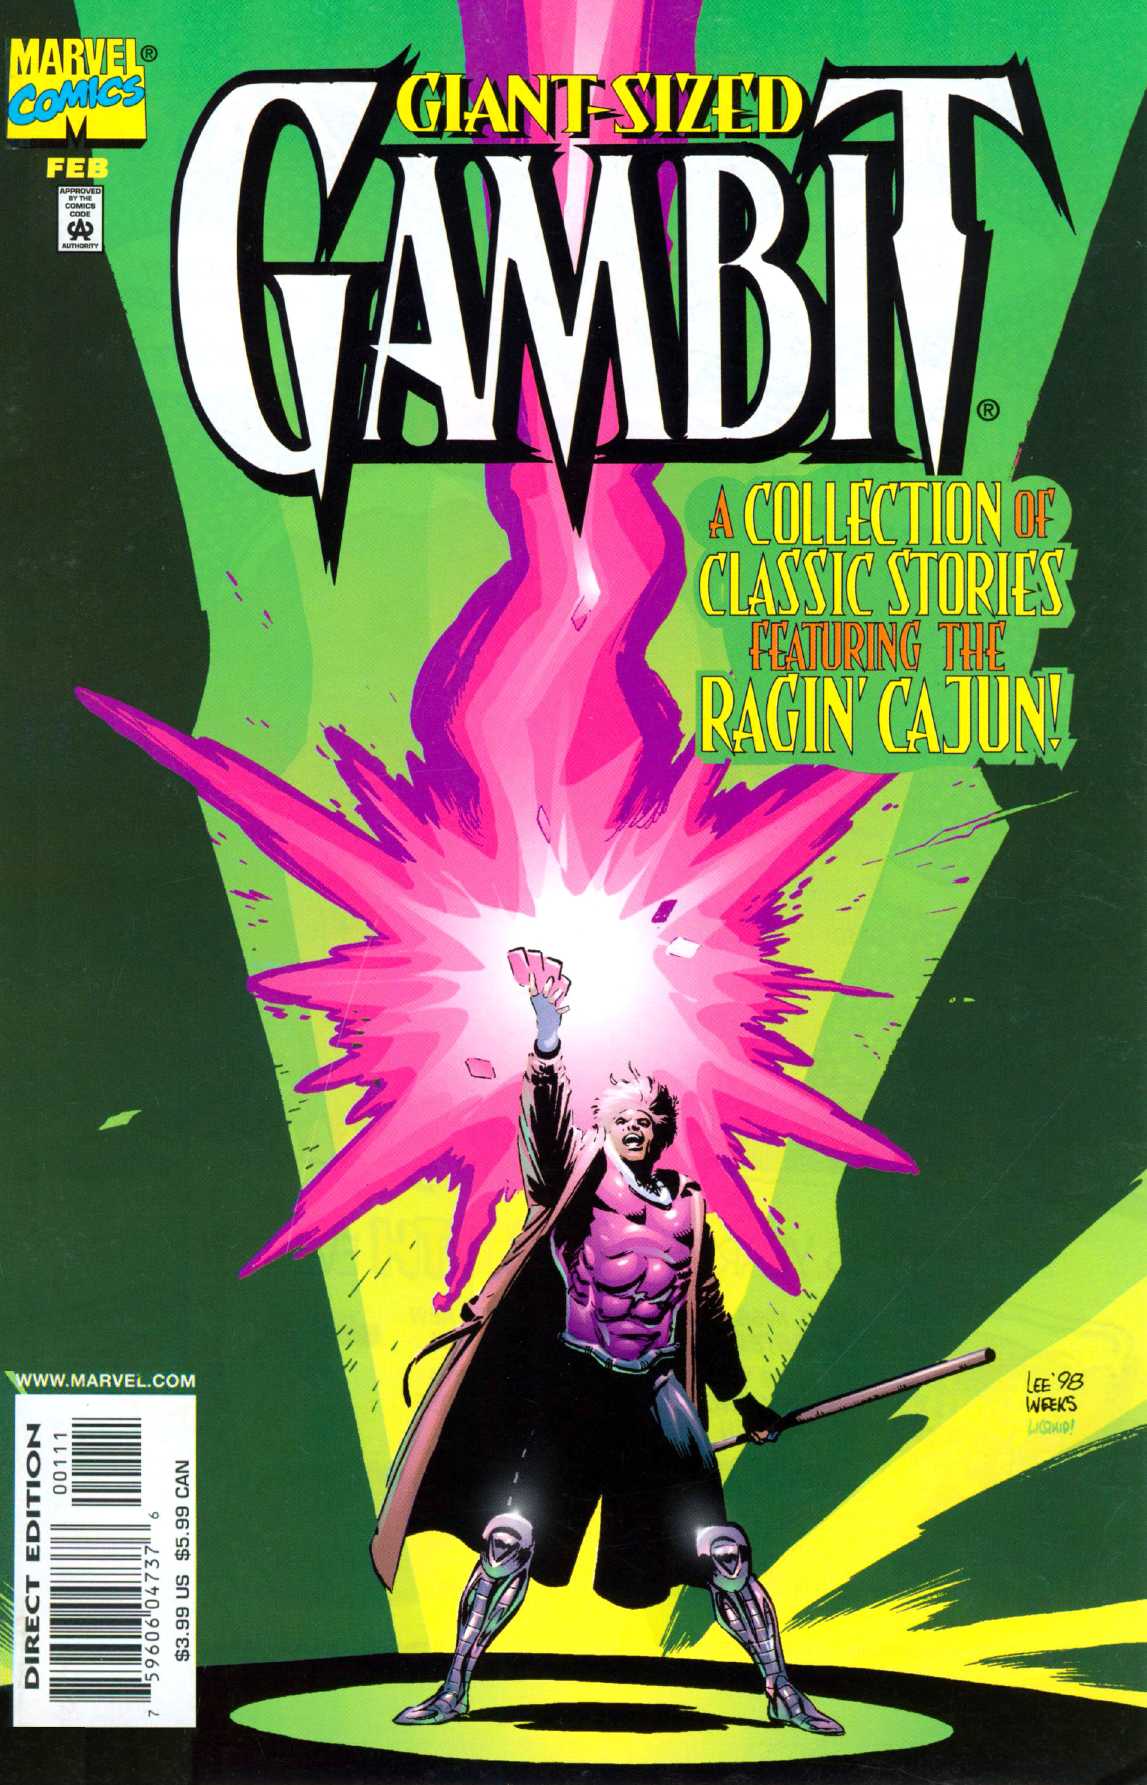 Read online Giant-Sized Gambit comic -  Issue # TPB - 1